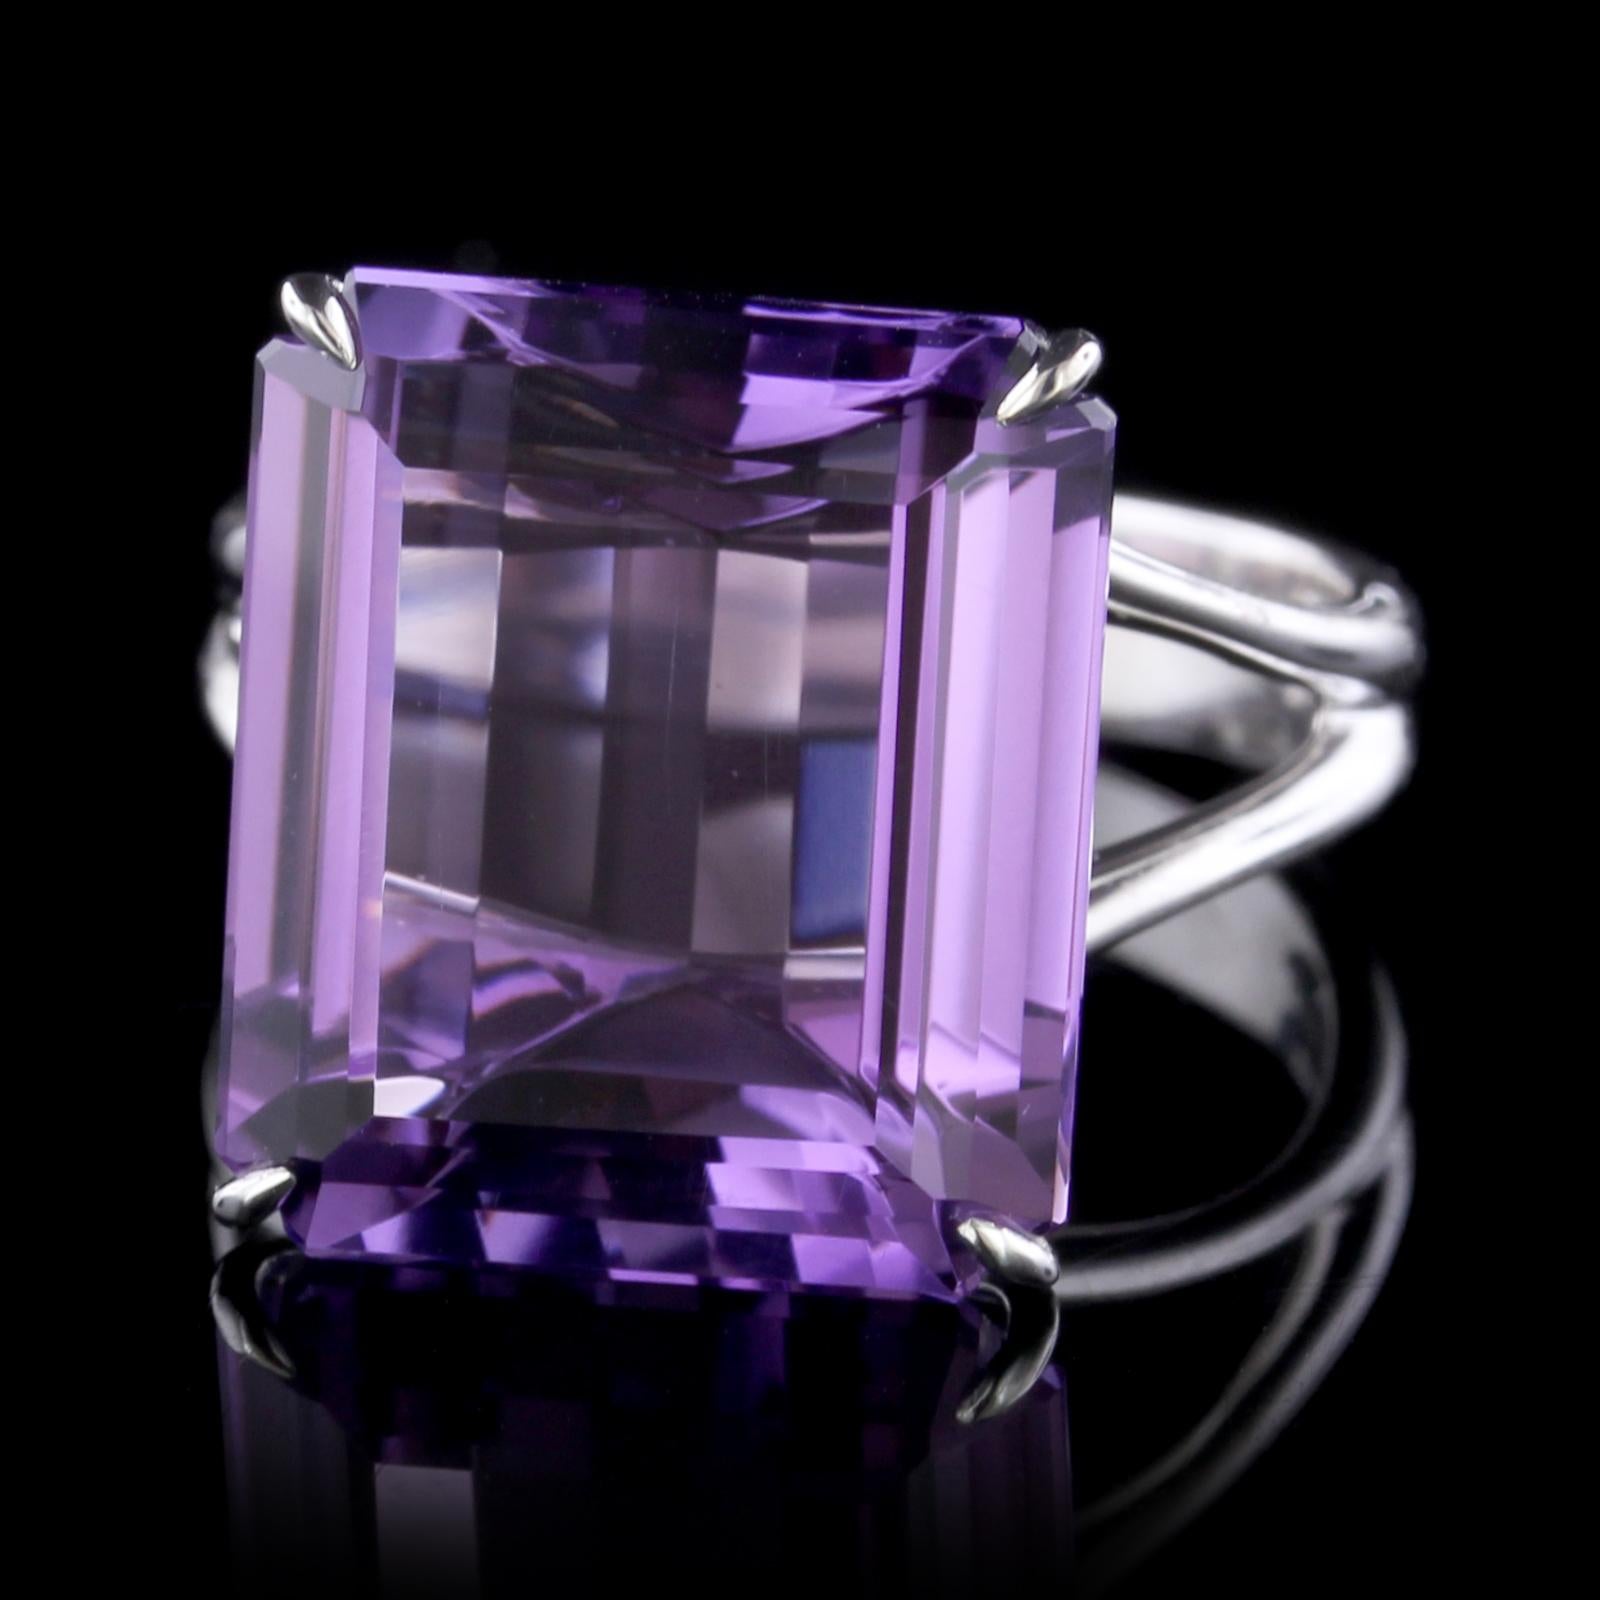 H. Stern 18K White Gold Amethyst Highlights Ring. The ring is set with an emerald cut amethyst measuring 16.00 x 14.00mm., size 7 1/2.